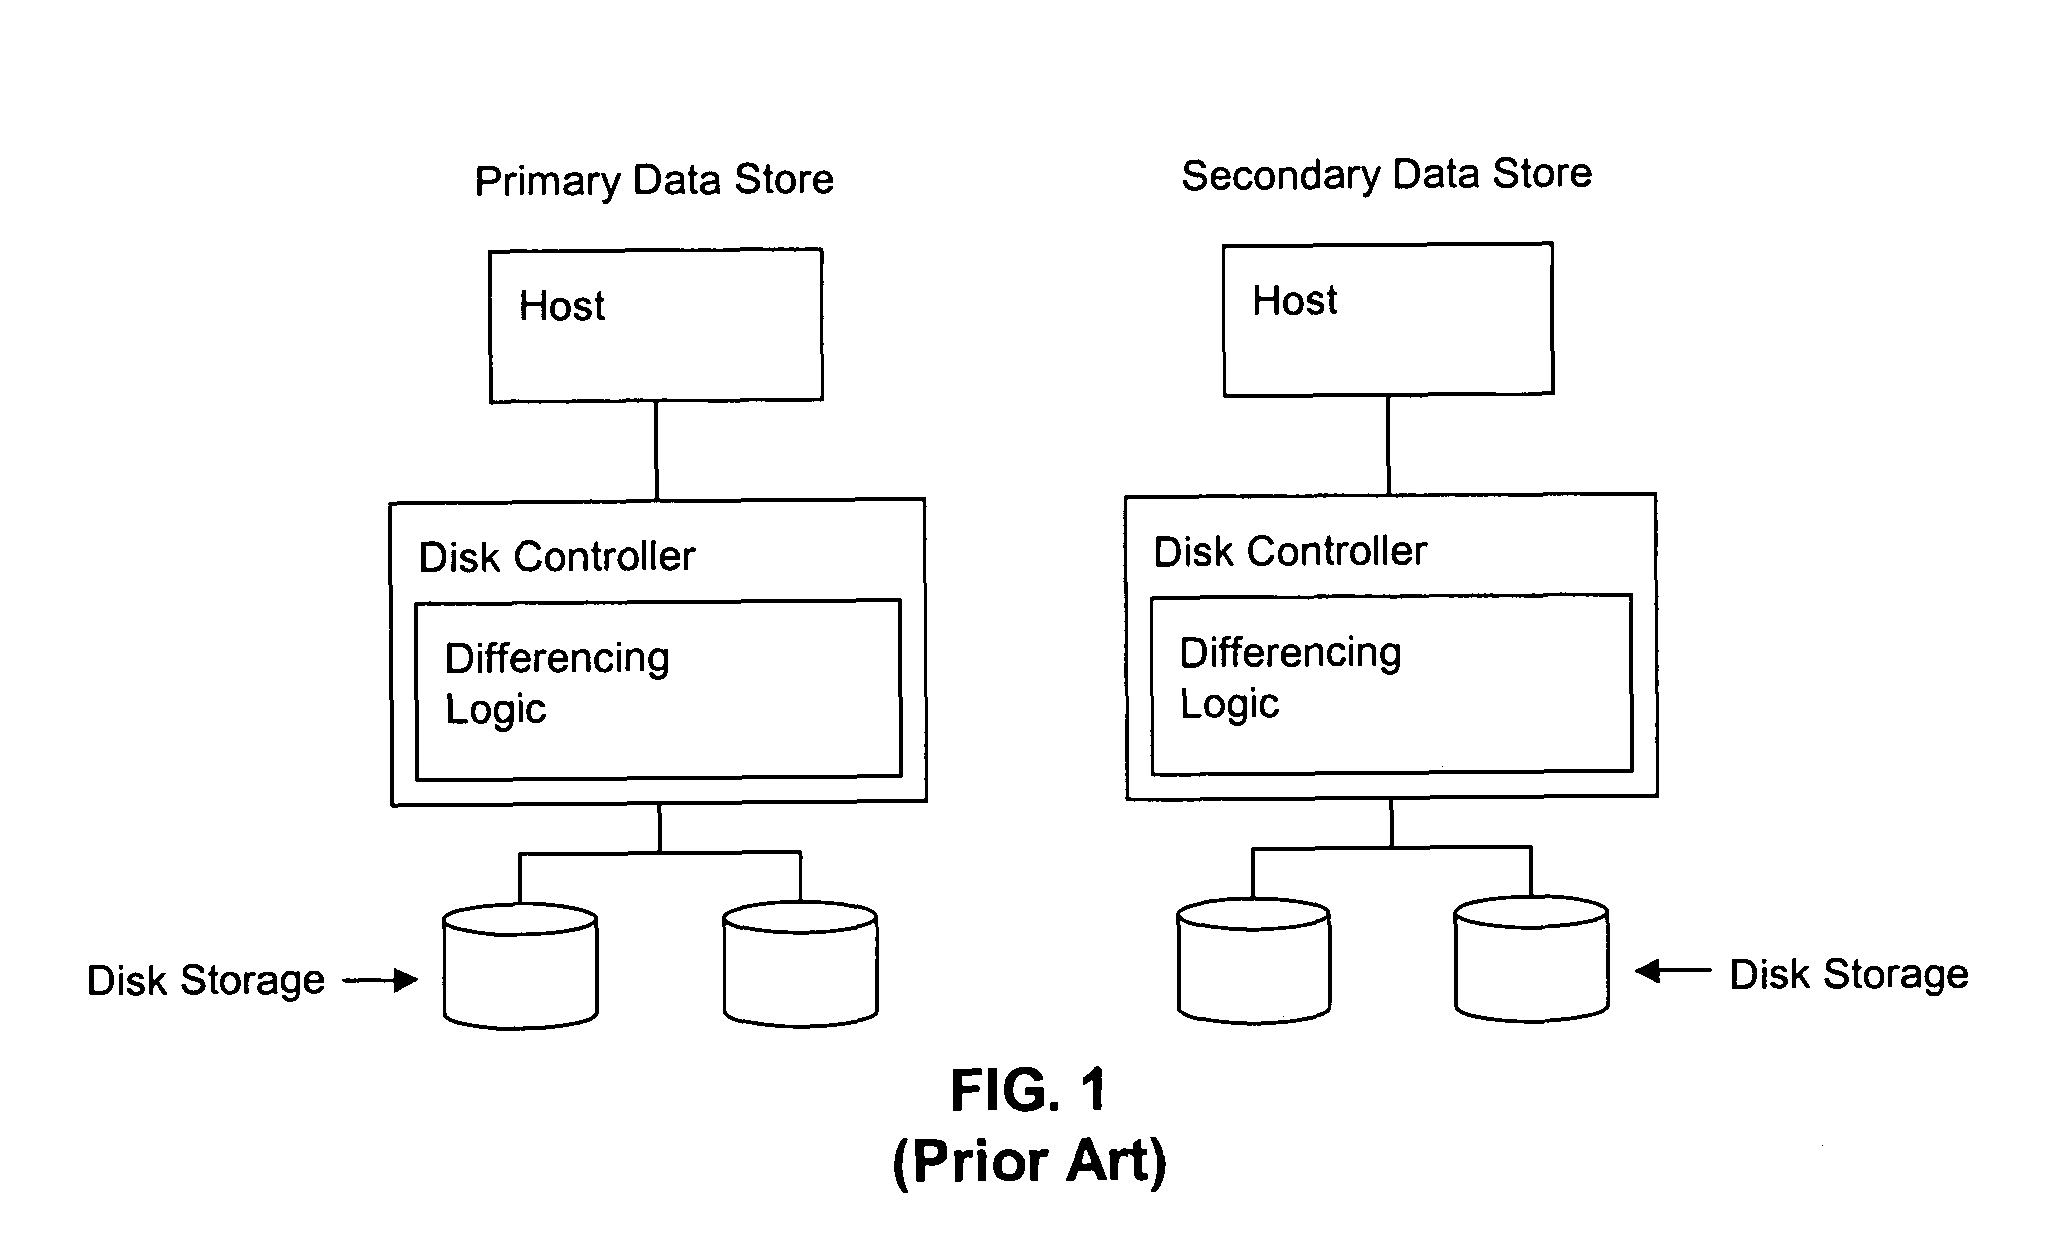 Transferring data from a primary data replication appliance in a primary data facility to a secondary data replication appliance in a secondary data facility